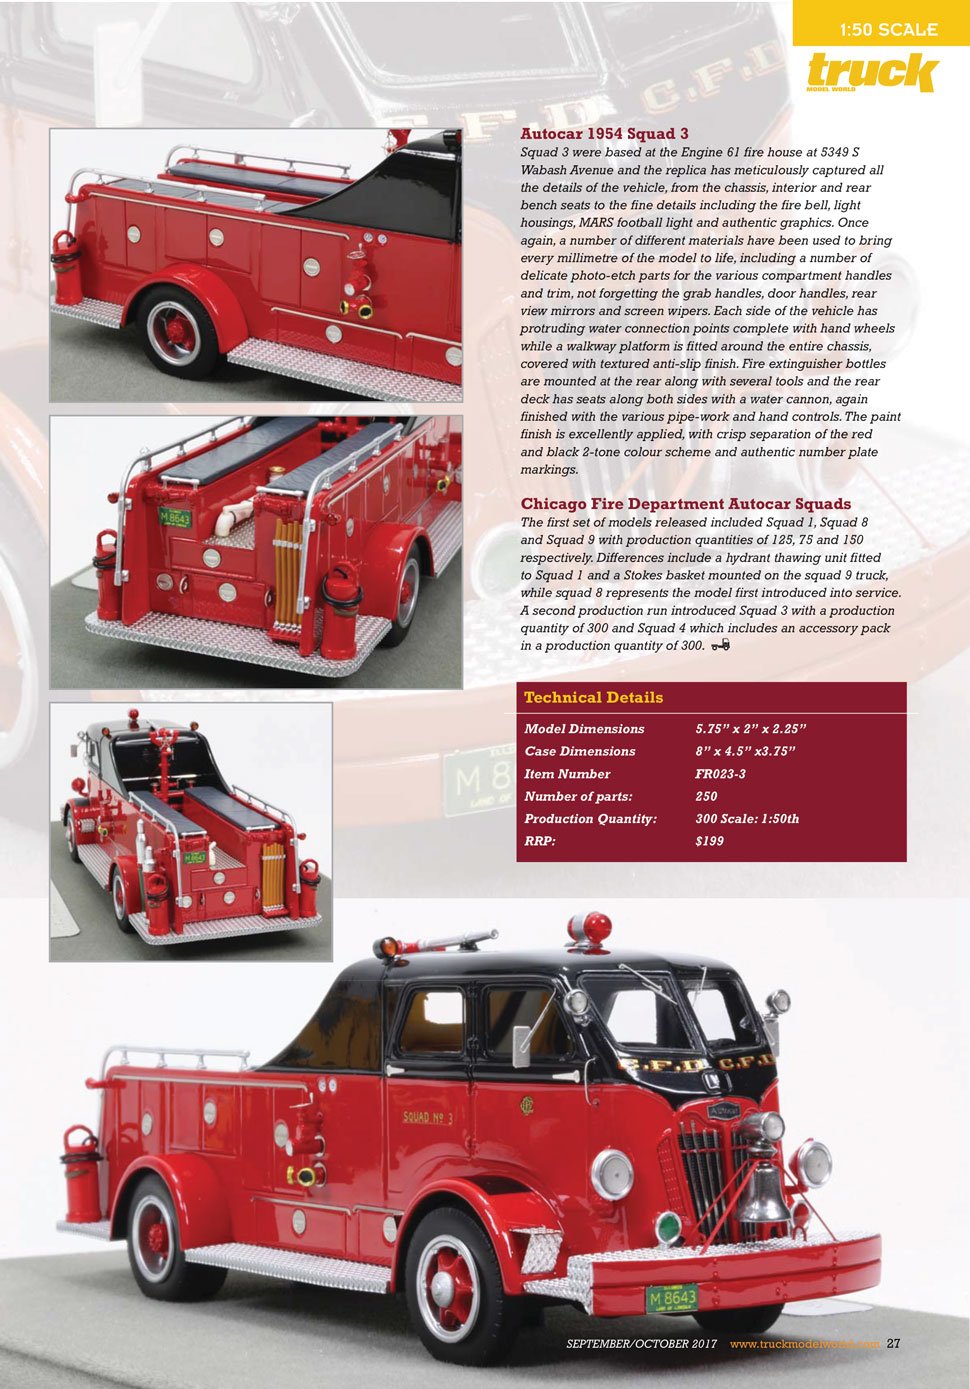 Chicago 1954 Autocar Squad featured in Truck Model World